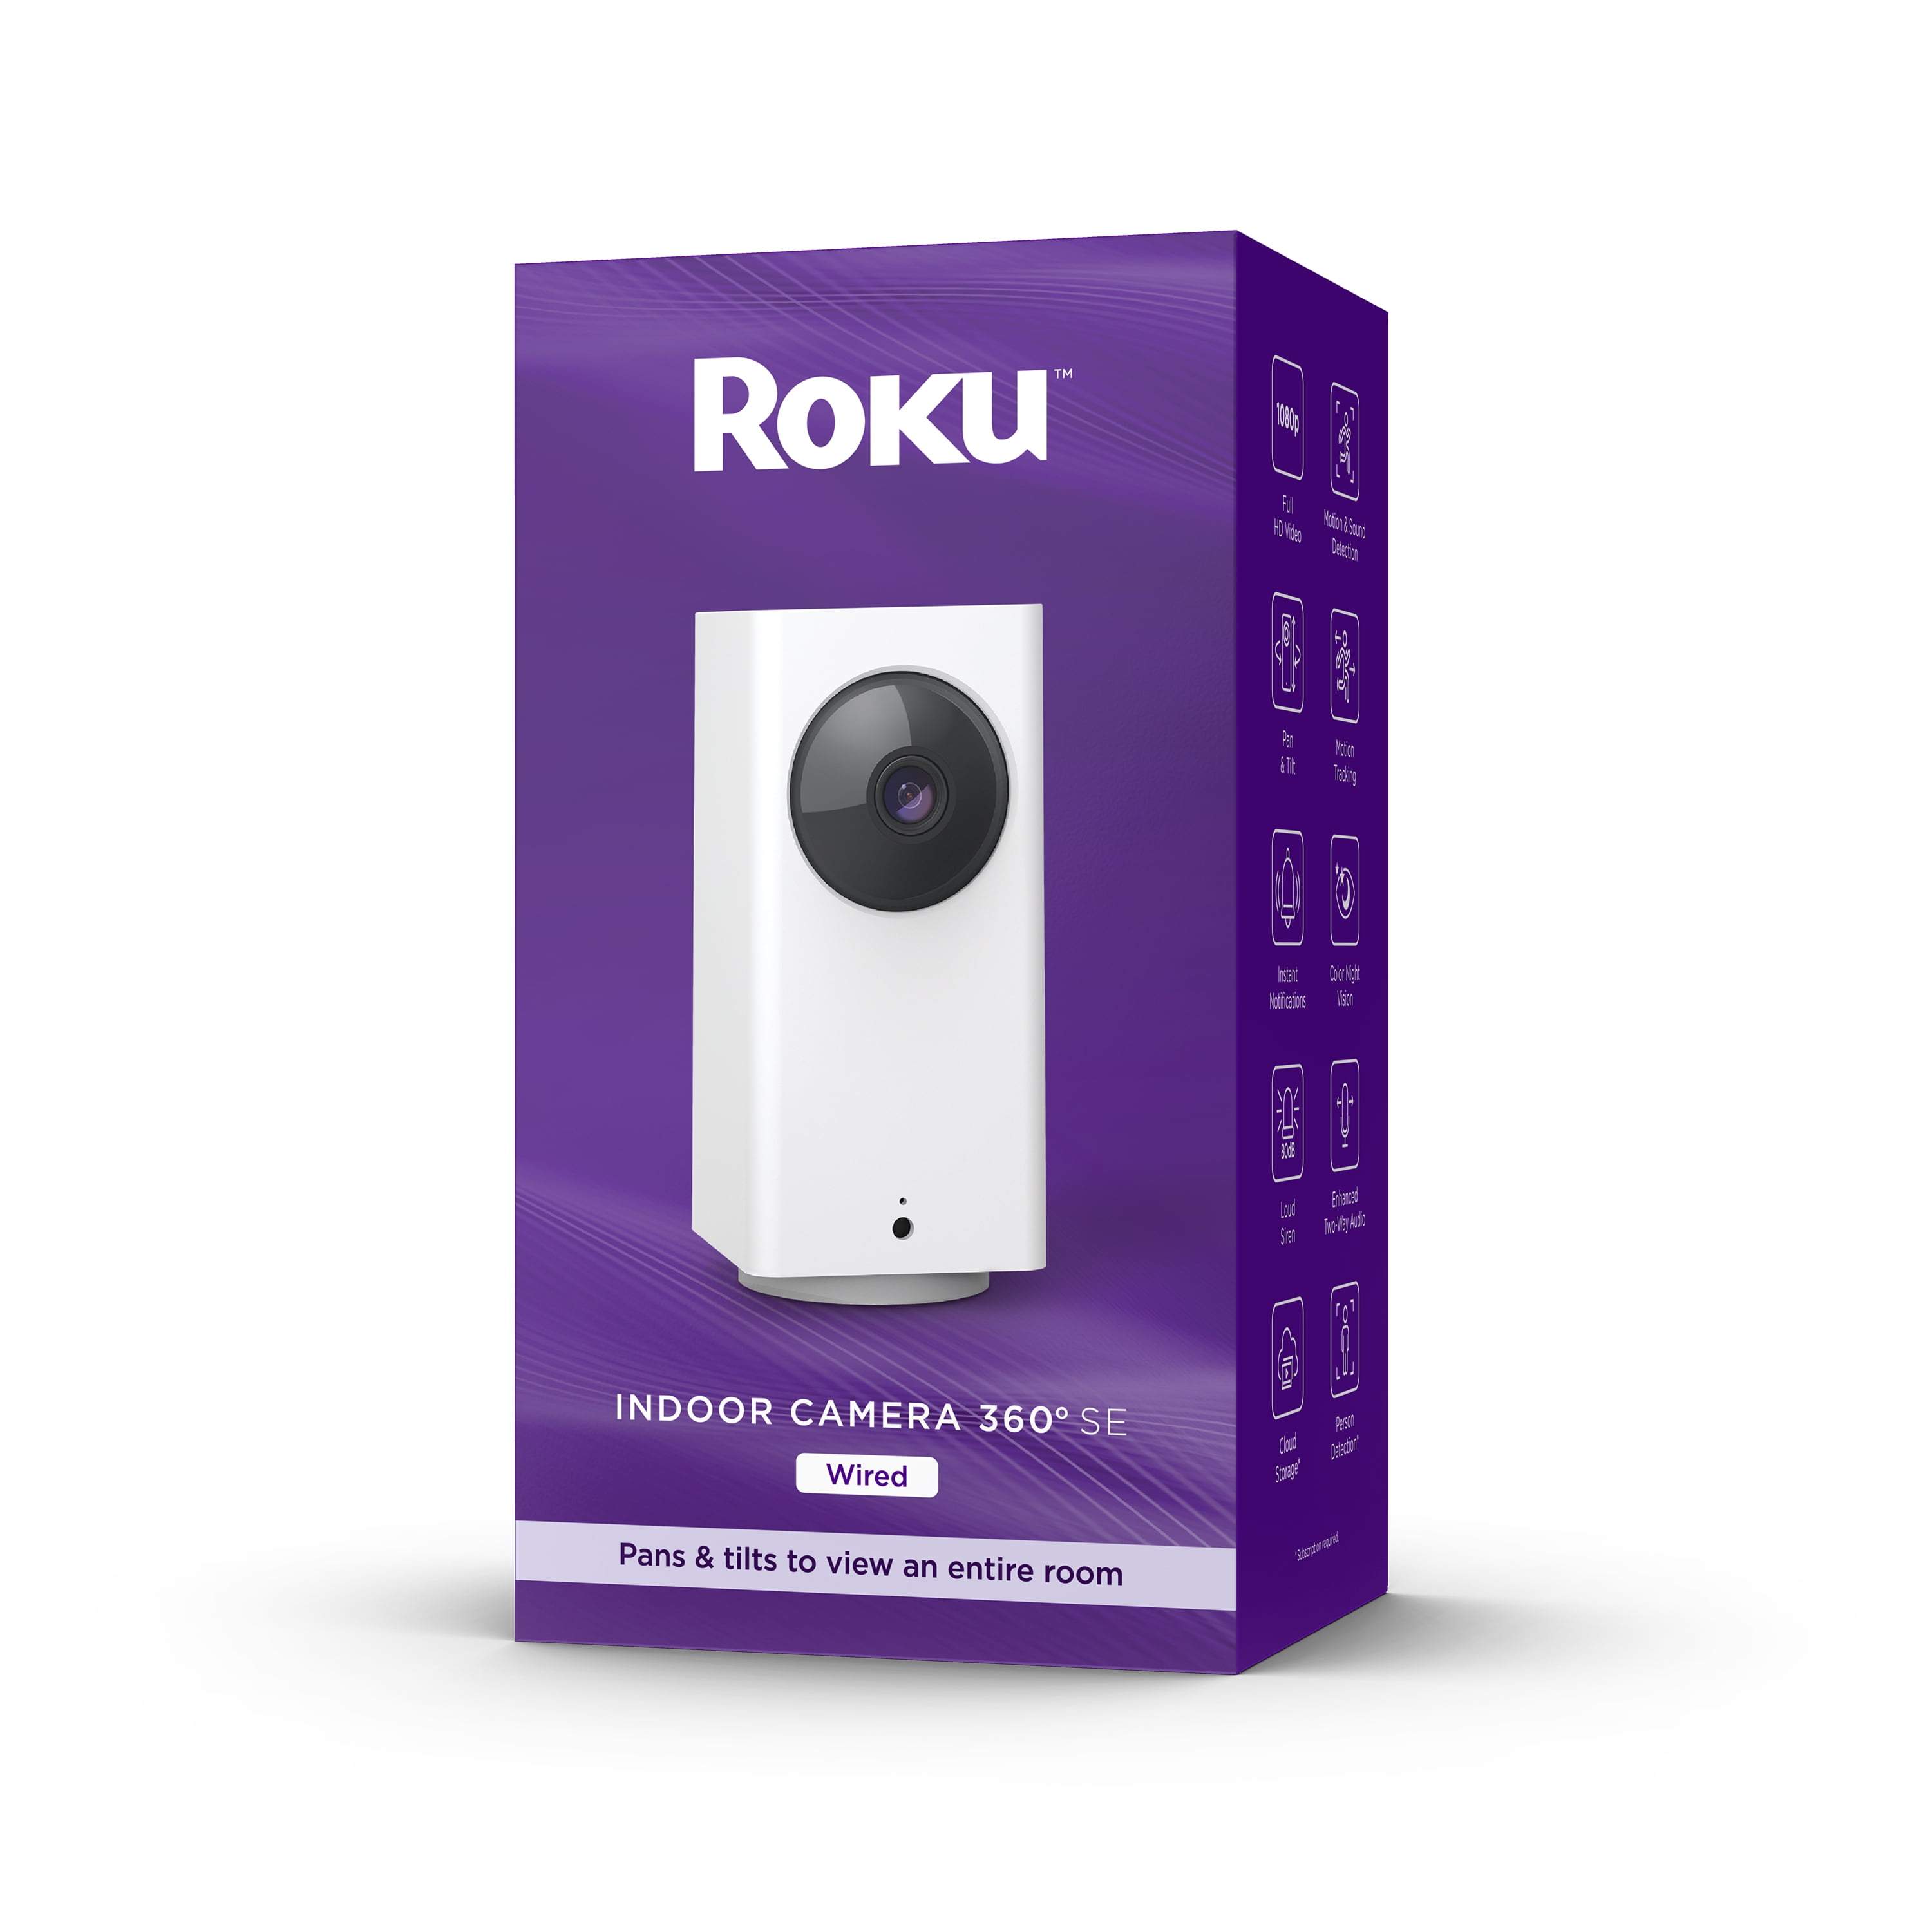 Roku Smart Home Indoor Camera 360 SE Wi-Fi-Connected - Wired Security Surveillance Camera with Motion Detection and Tracking